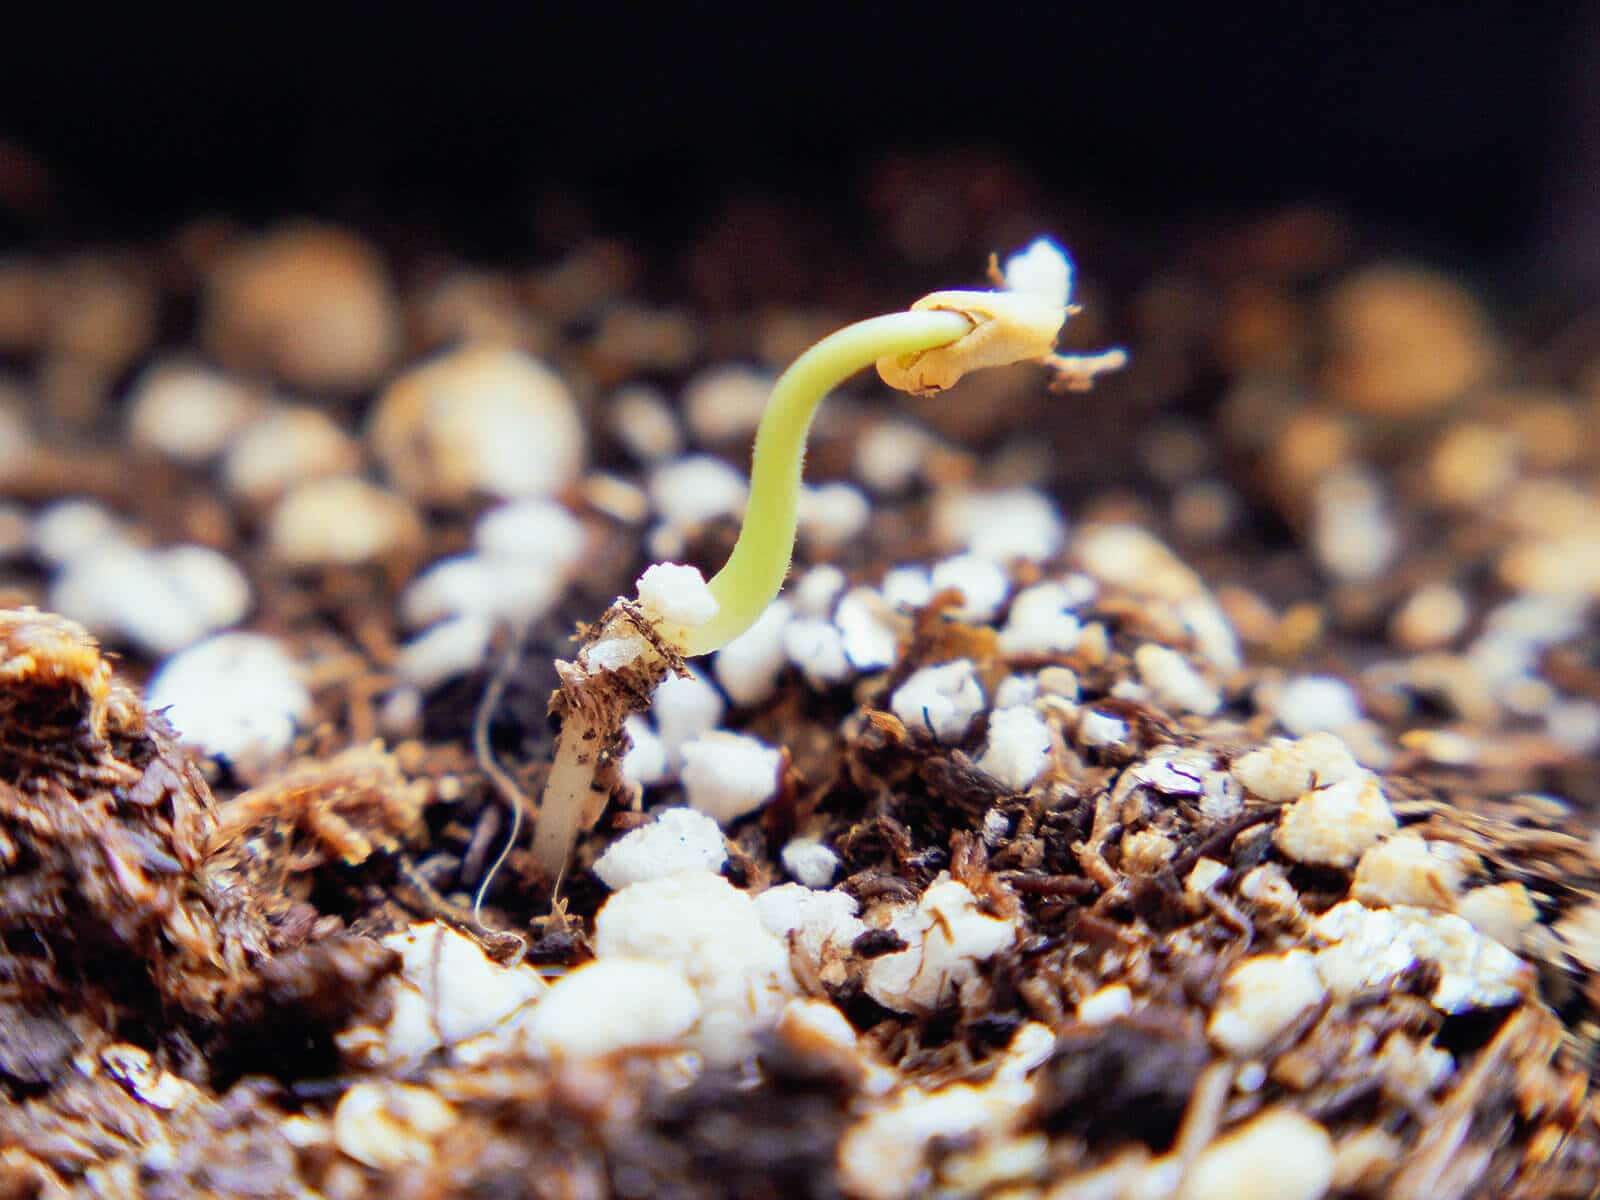 Transplant the germinated seed in potting soil